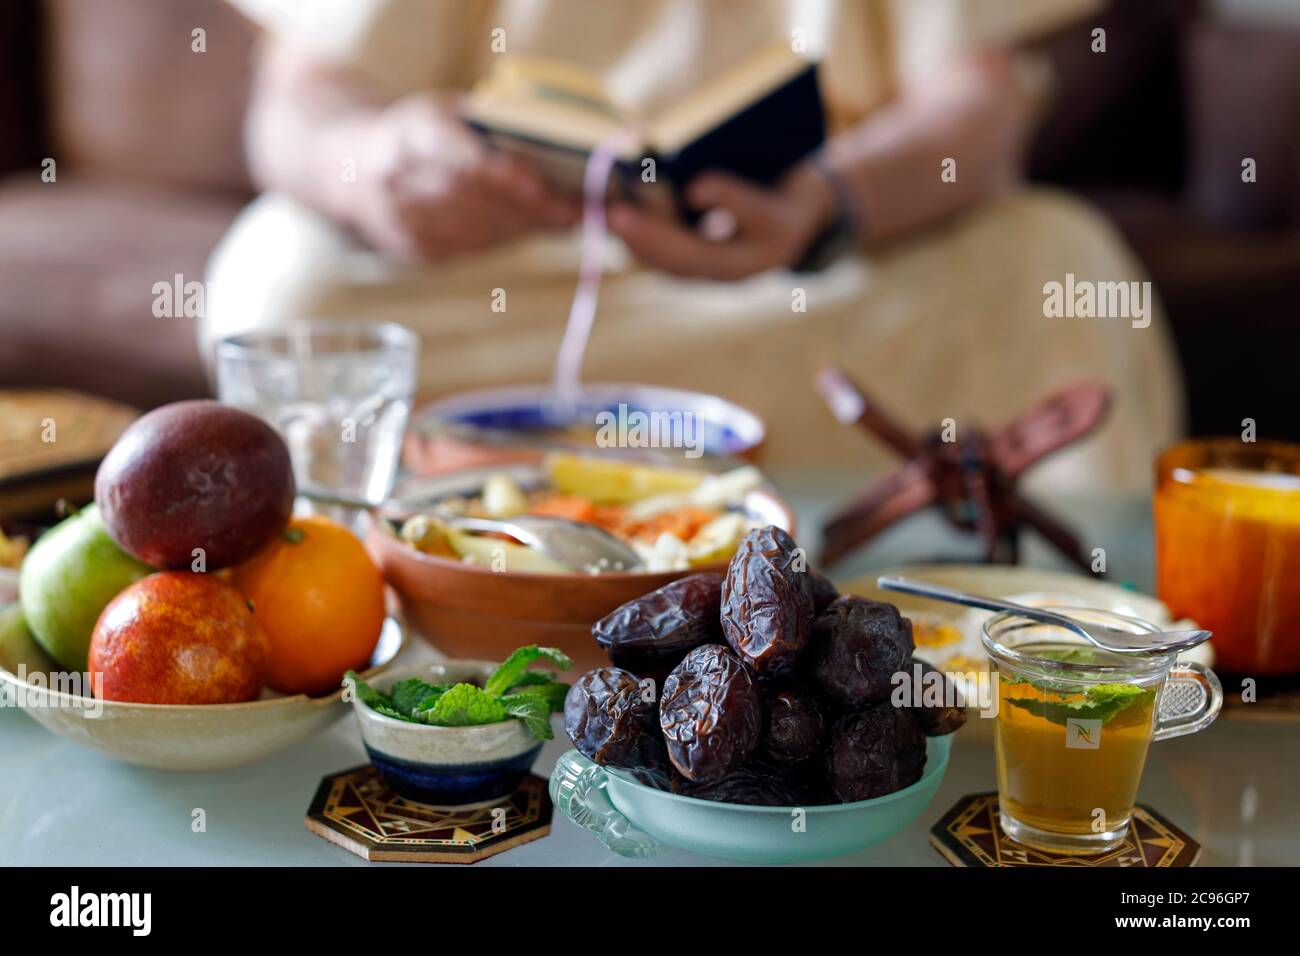 Traditional meal for iftar in time of Ramadan after the fast has been broken.  Muslim reading Quran.  France. Stock Photo